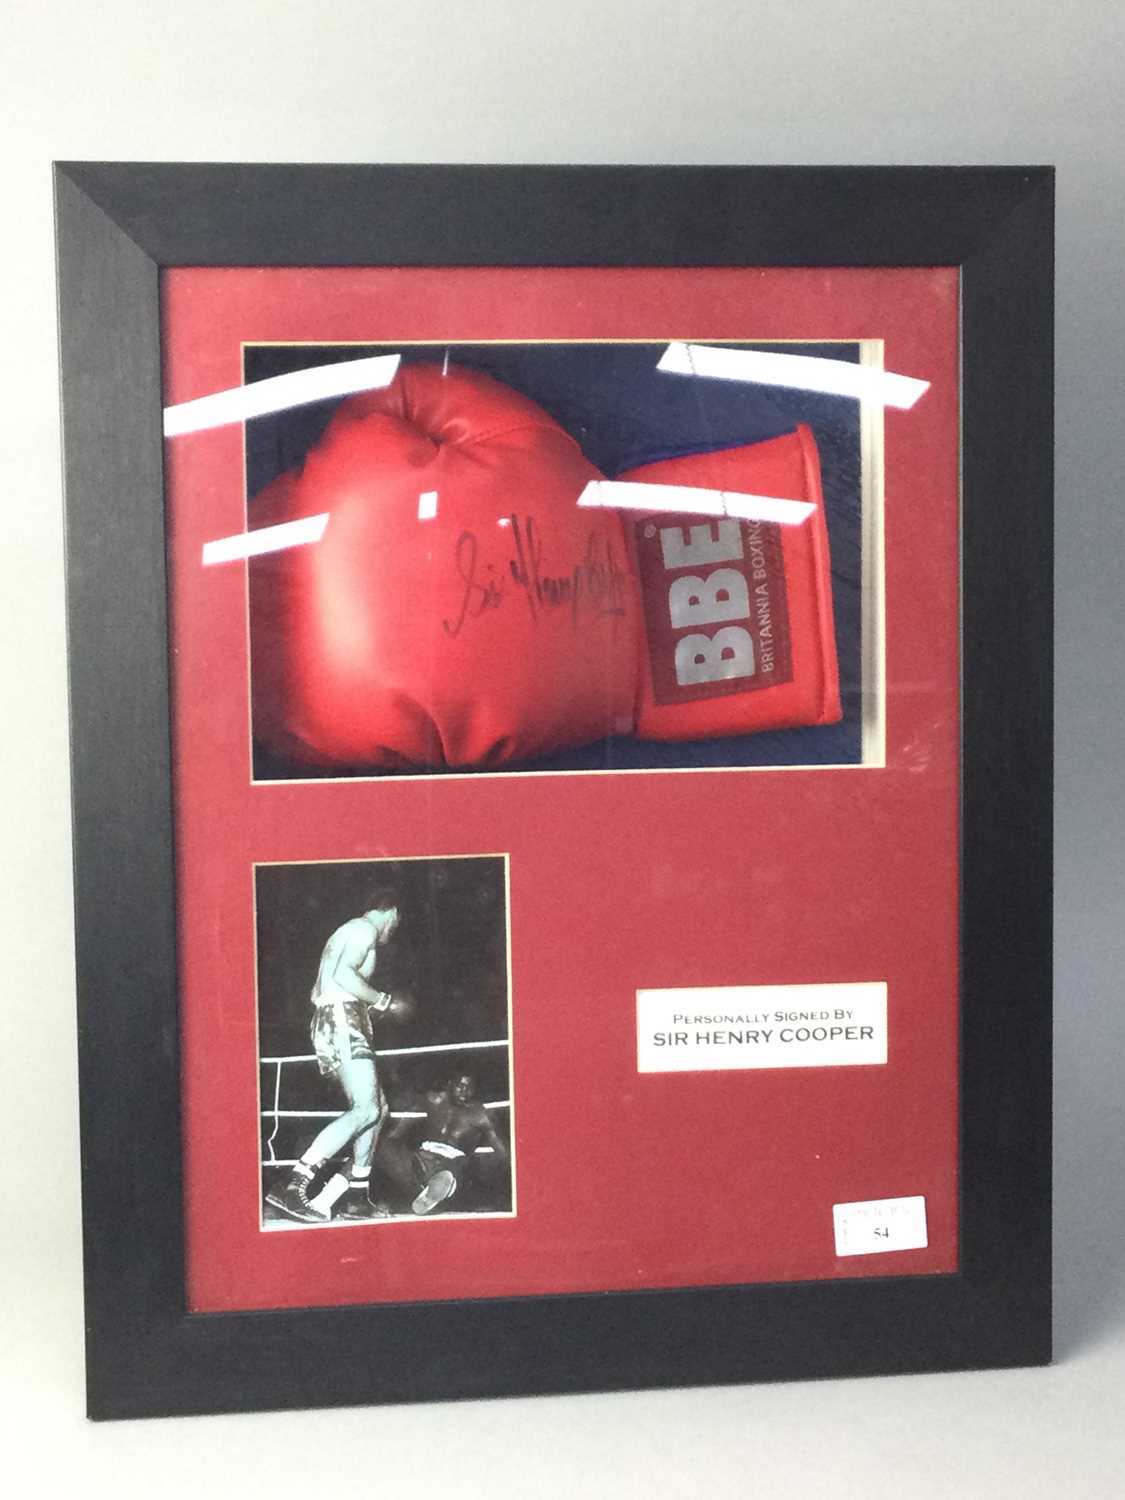 Lot 54 - A BOXING GLOVE SIGNED BY SIR HENRY COOPER